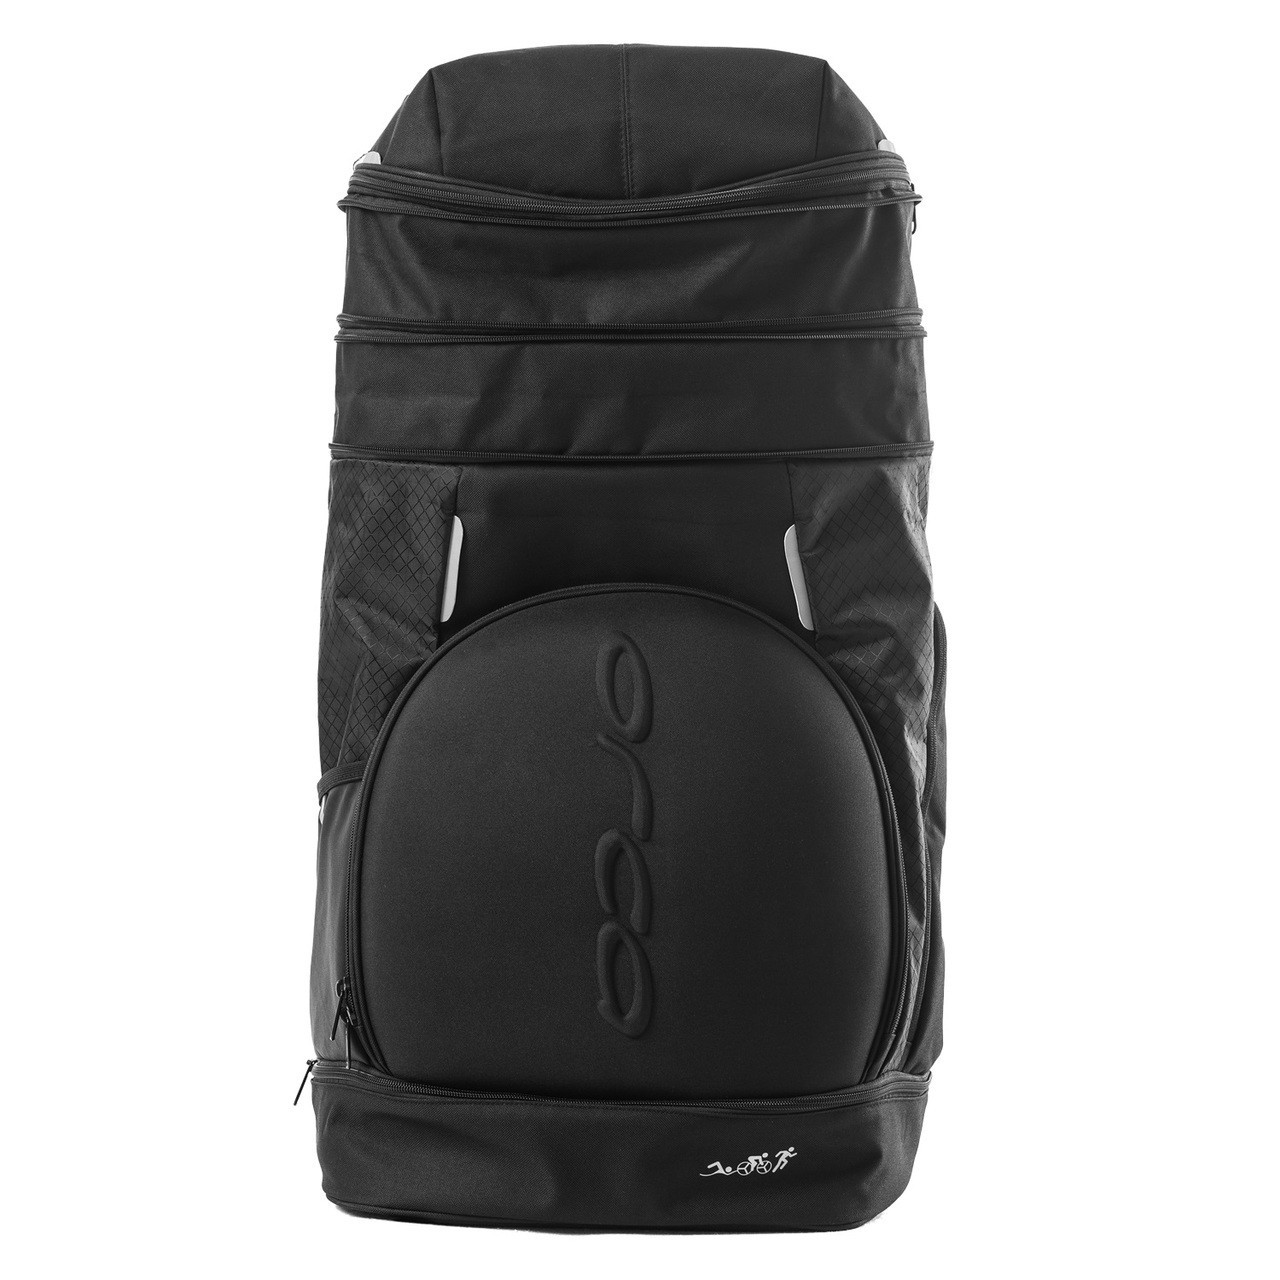 Orca Transition Backpack - 2019 price